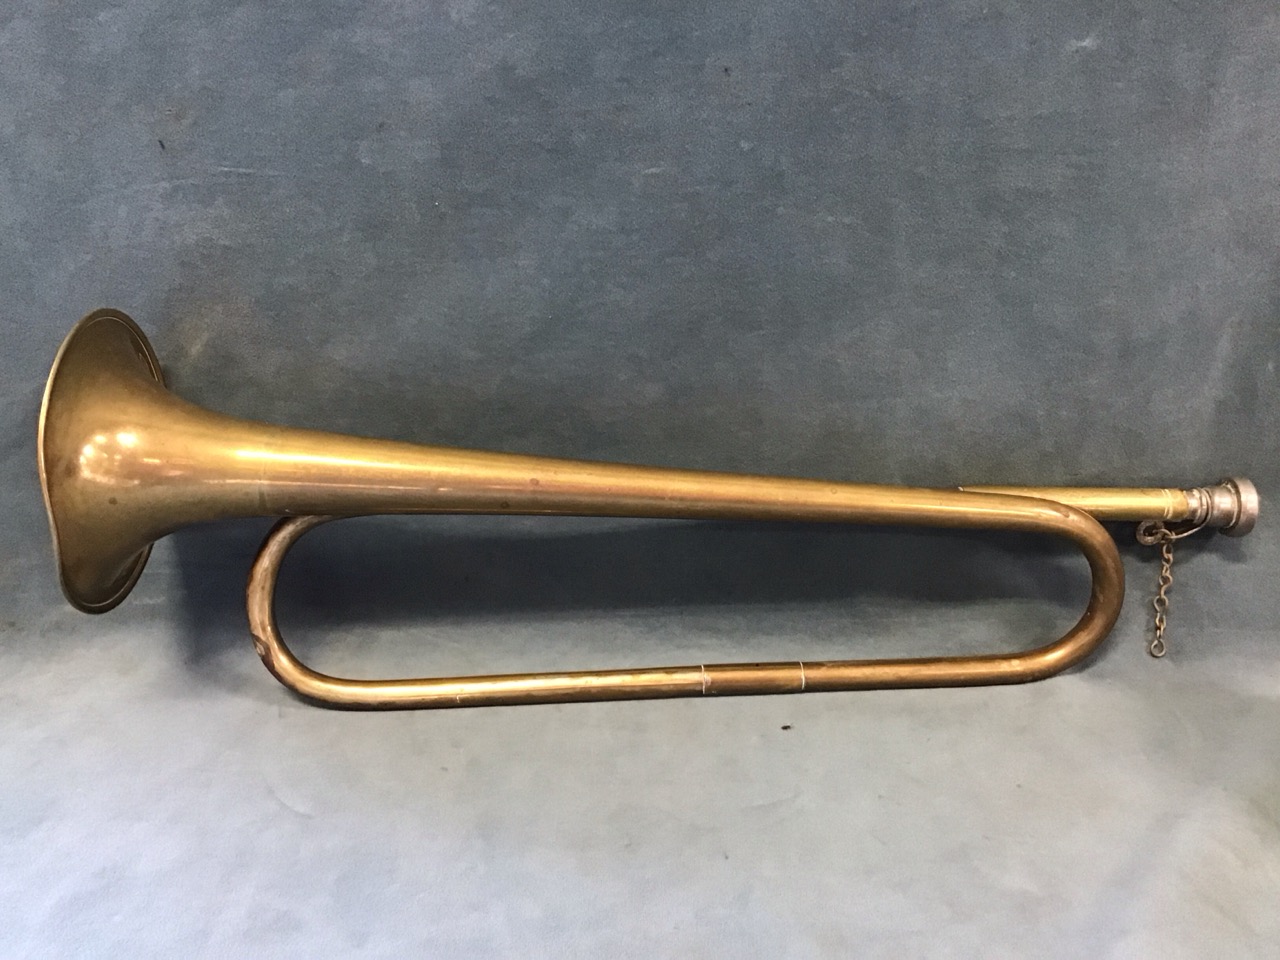 A brass valveless trumpet - 19.25in; and a copper & brass bugle - 12in. (2) - Image 2 of 3